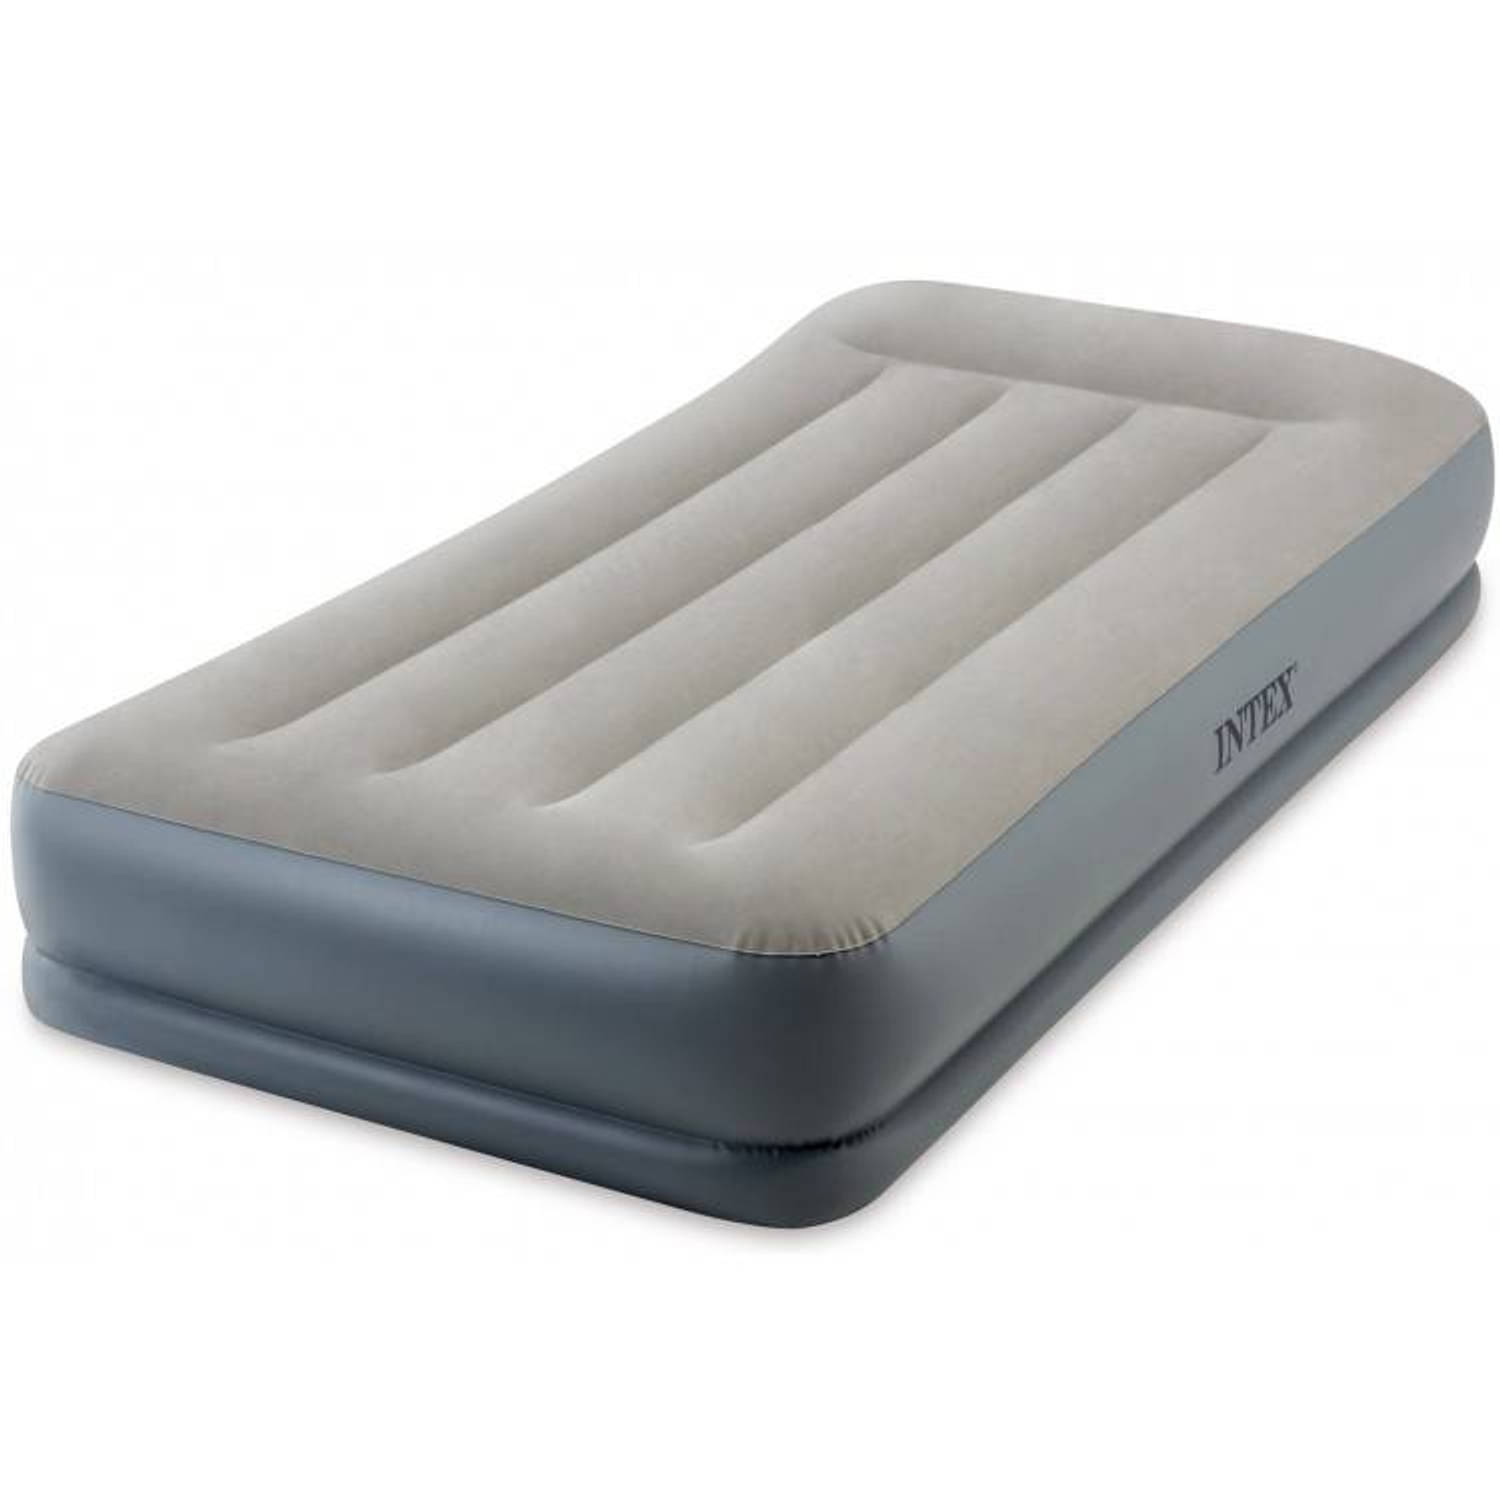 Intex Pillow Rest Mid-Rise luchtbed eenpersoons